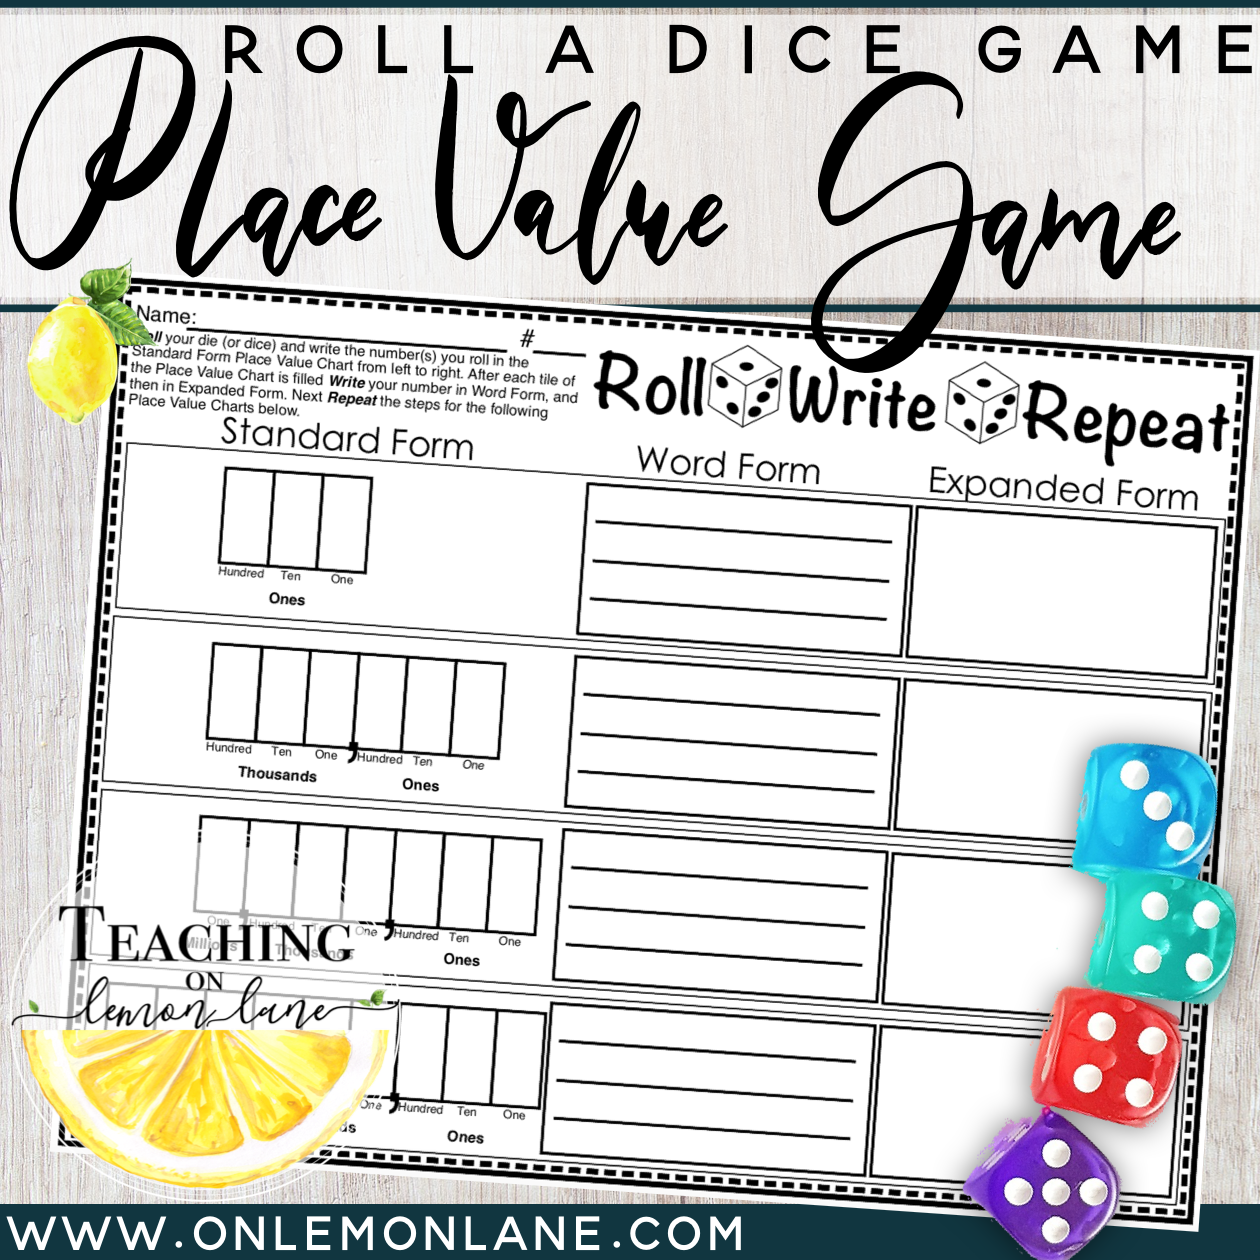 Dice and roll odetari текст. Настолки Roll and write. Places dice. Roll and write games. Roll and write настольные своими руками.